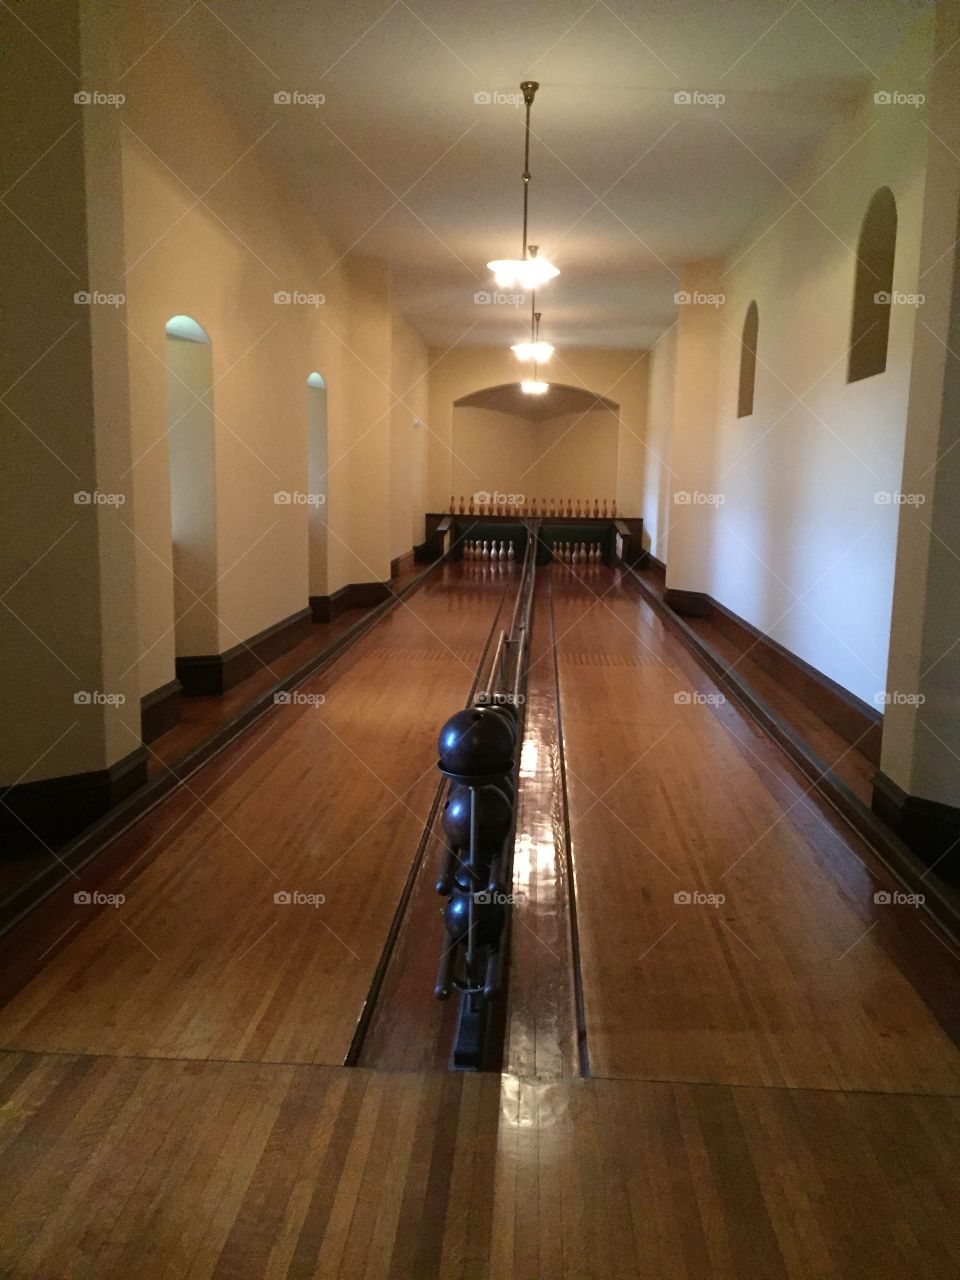 Biltmore House bowling alley